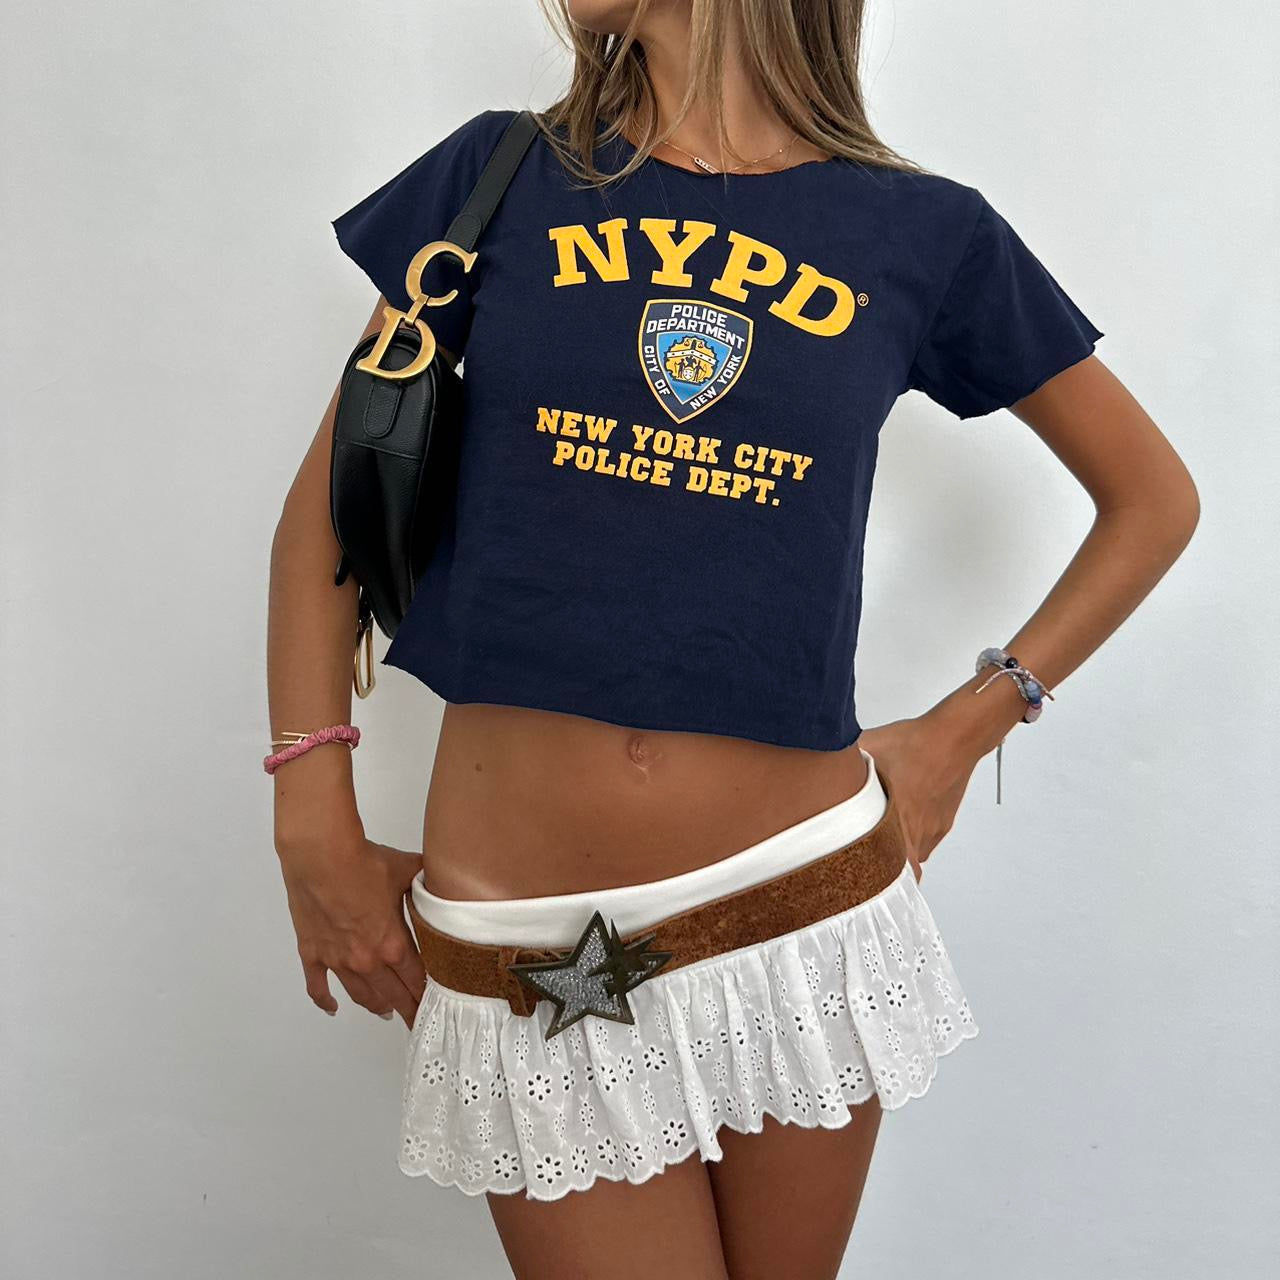 Vintage NYPD baby tee